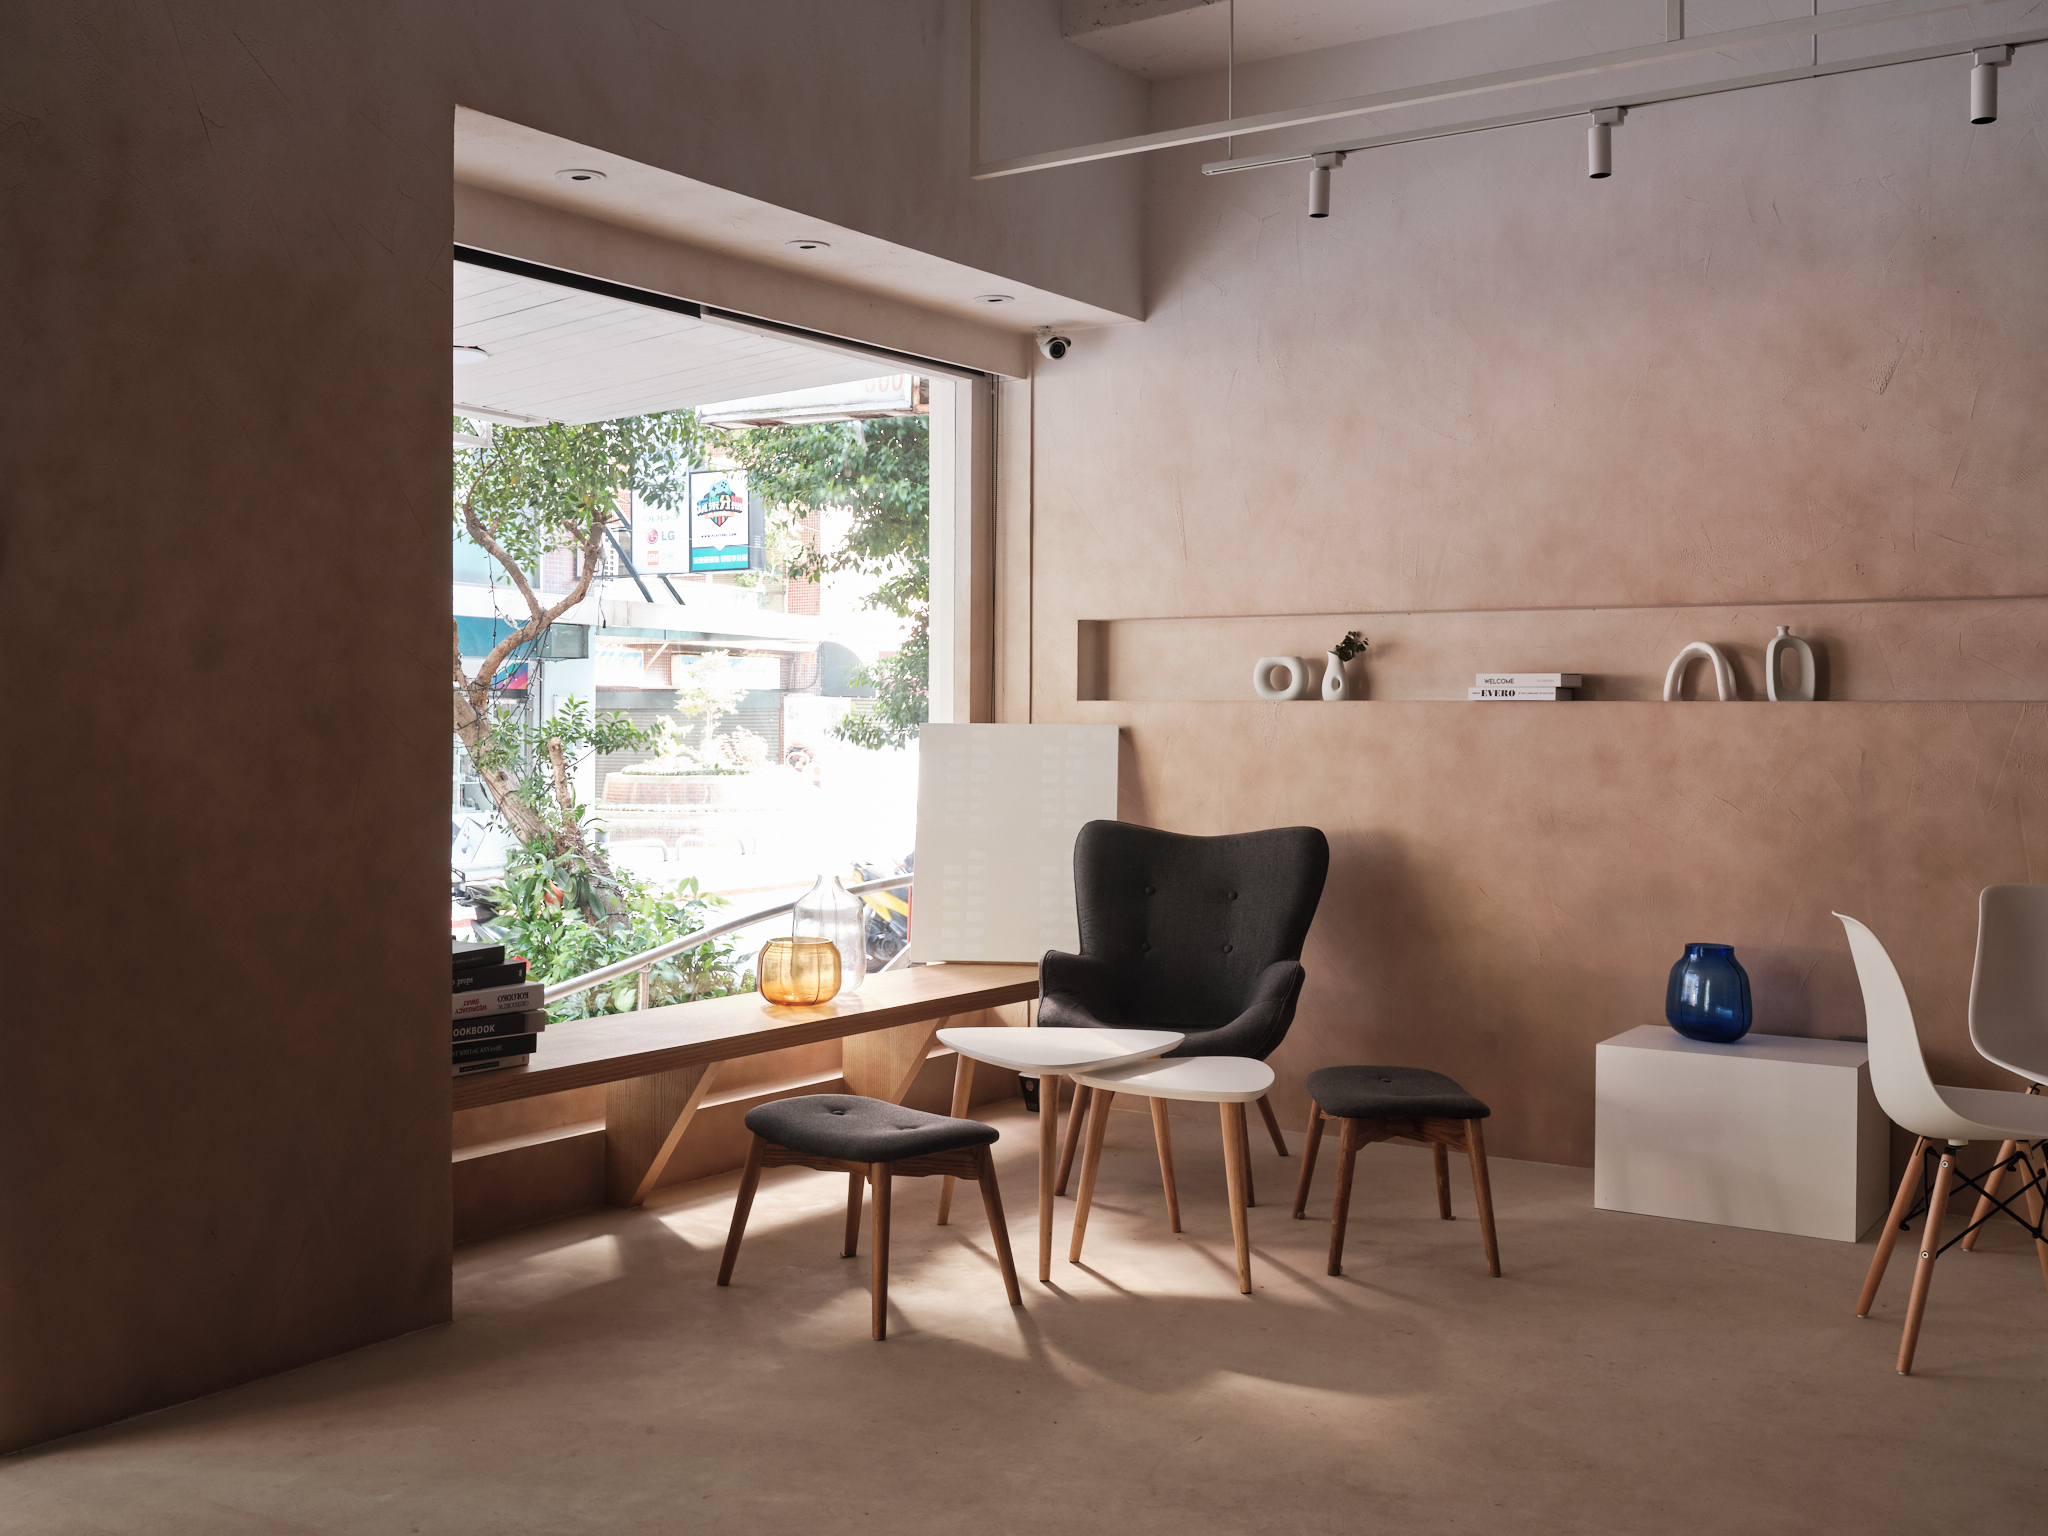 MUSE Design Winners - LA PLACE by centred